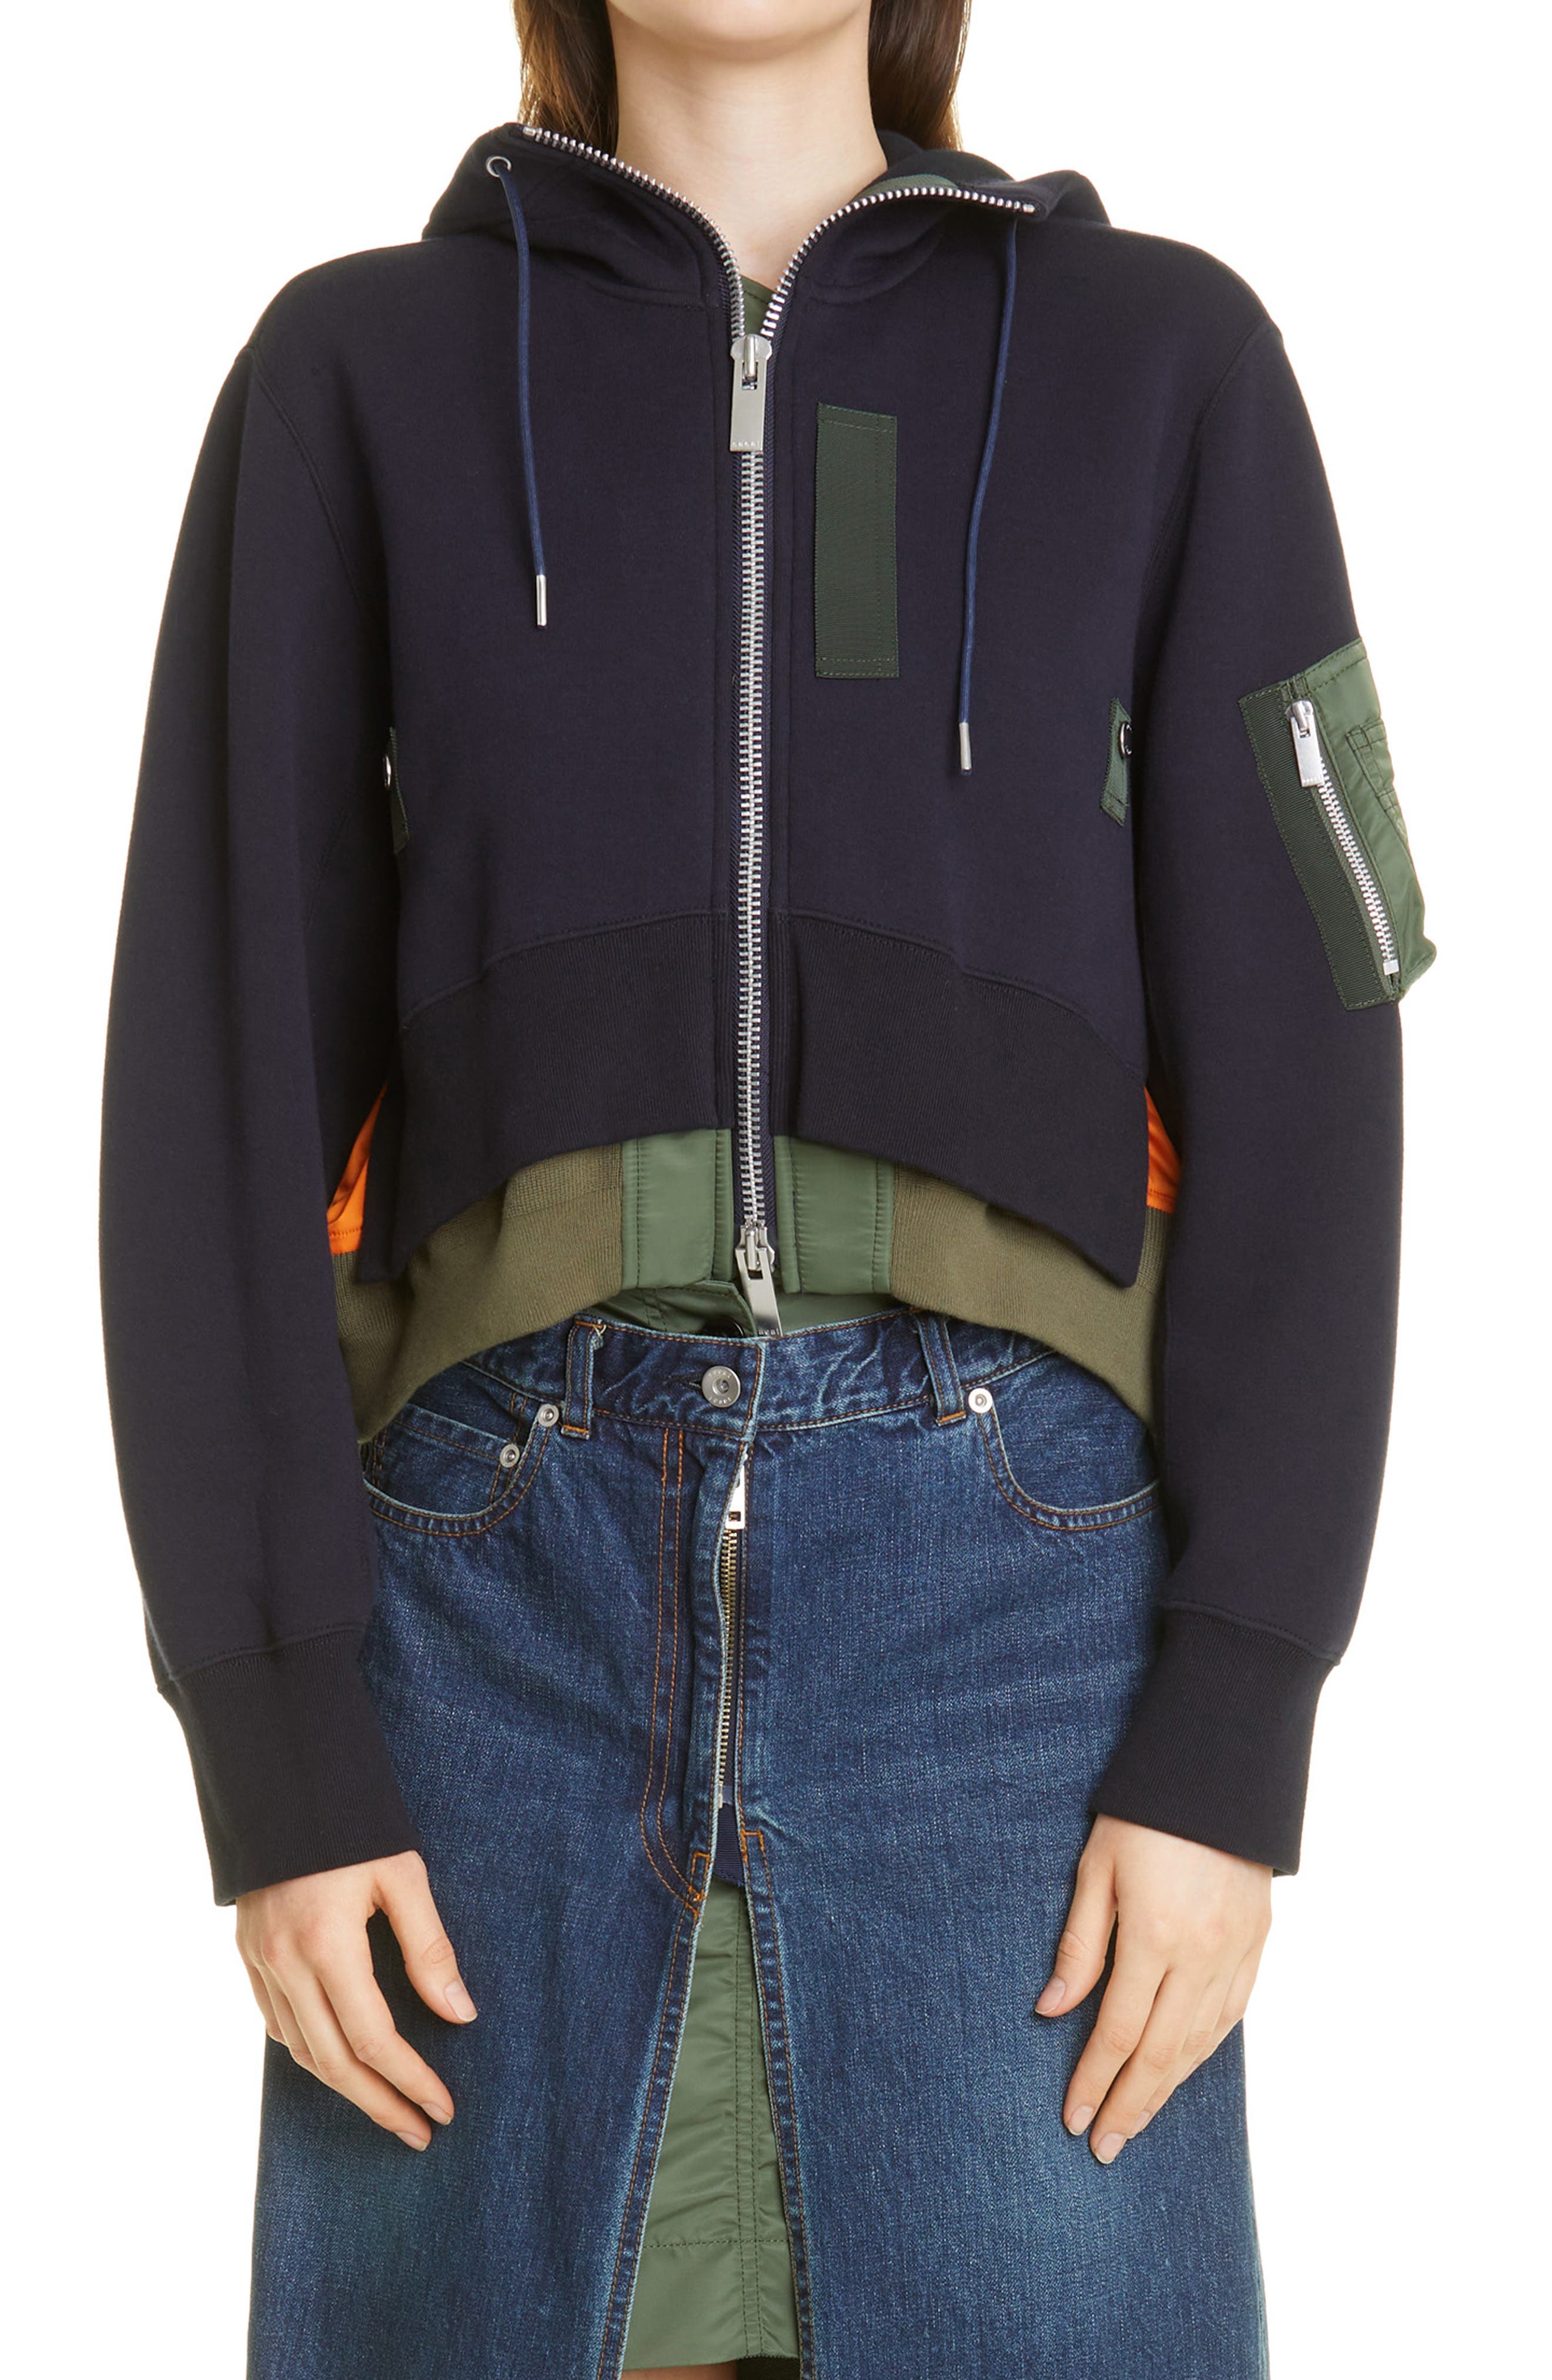 Sacai Layered Sponge Hoodie in Navy at Nordstrom, Size 3